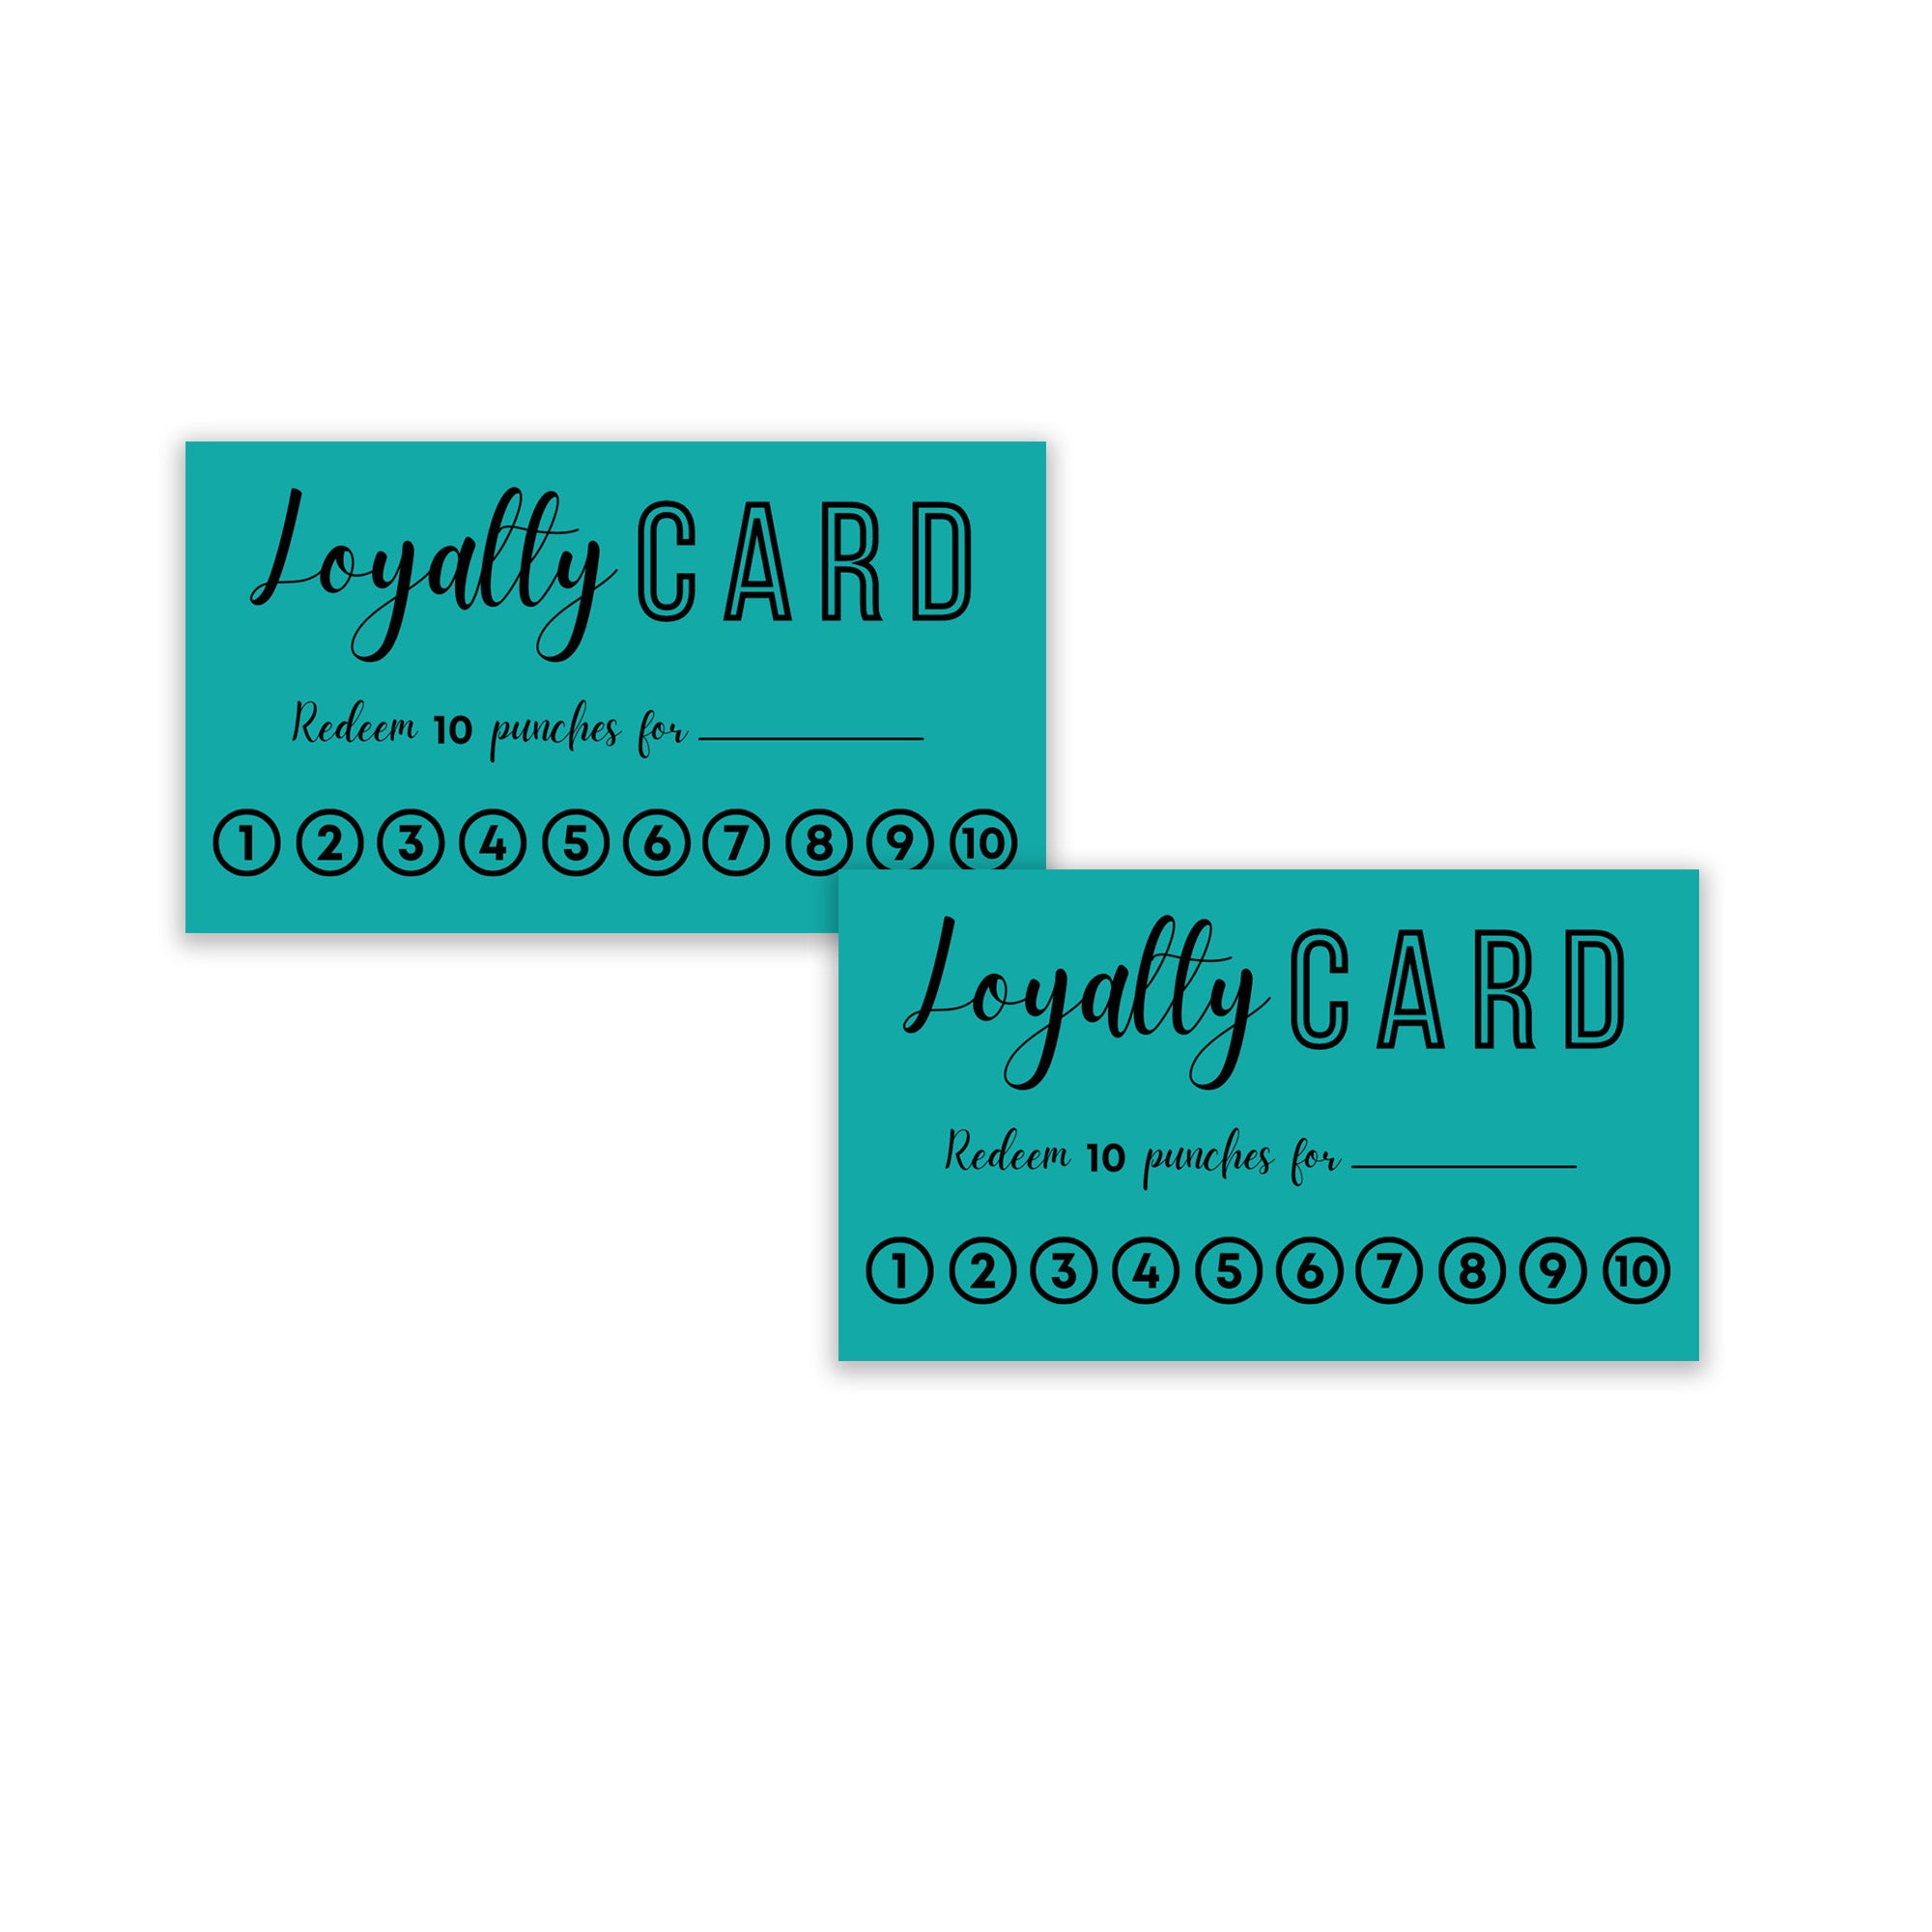 Koyal Wholesale Barber Shop Reward Punch Cards, Loyalty Cards for Small  Business Customers, Award Cards, 100-Pack 